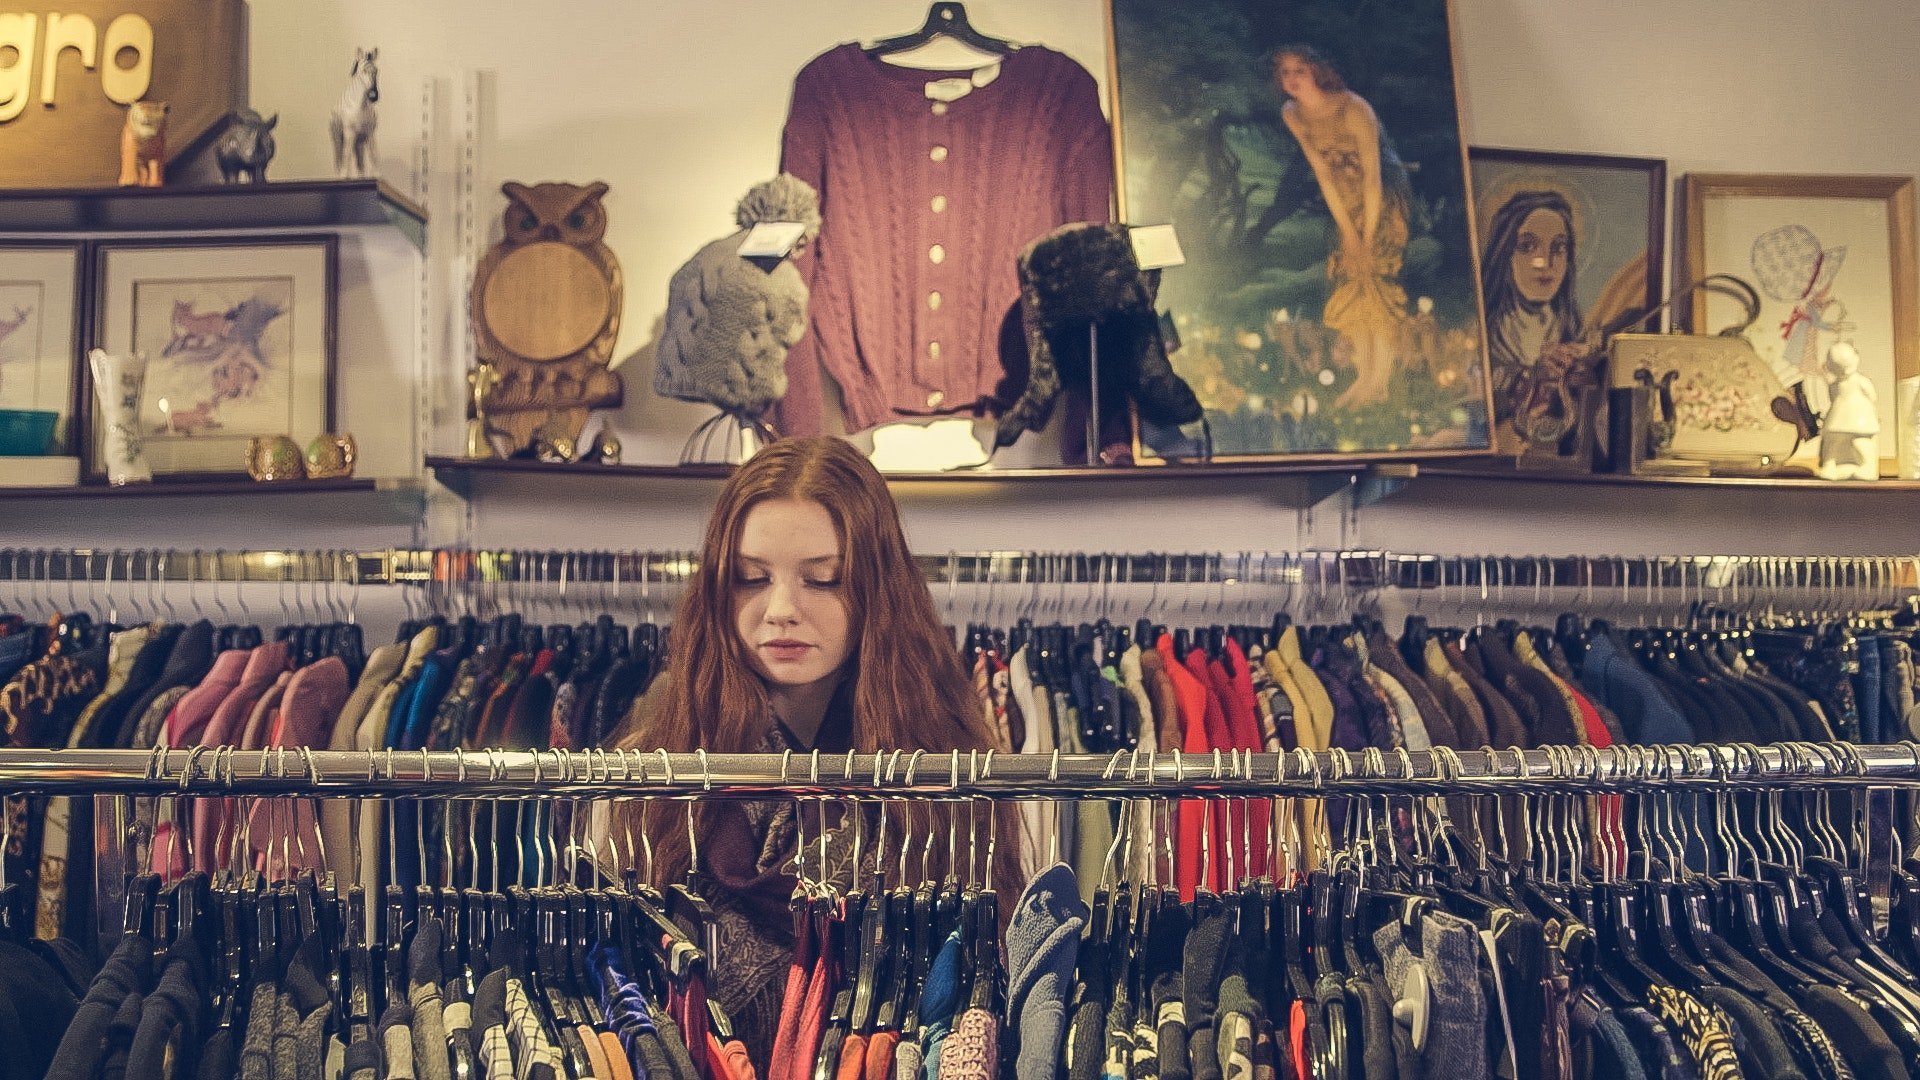 Woman shopping in a boutique store. | Source: pexels